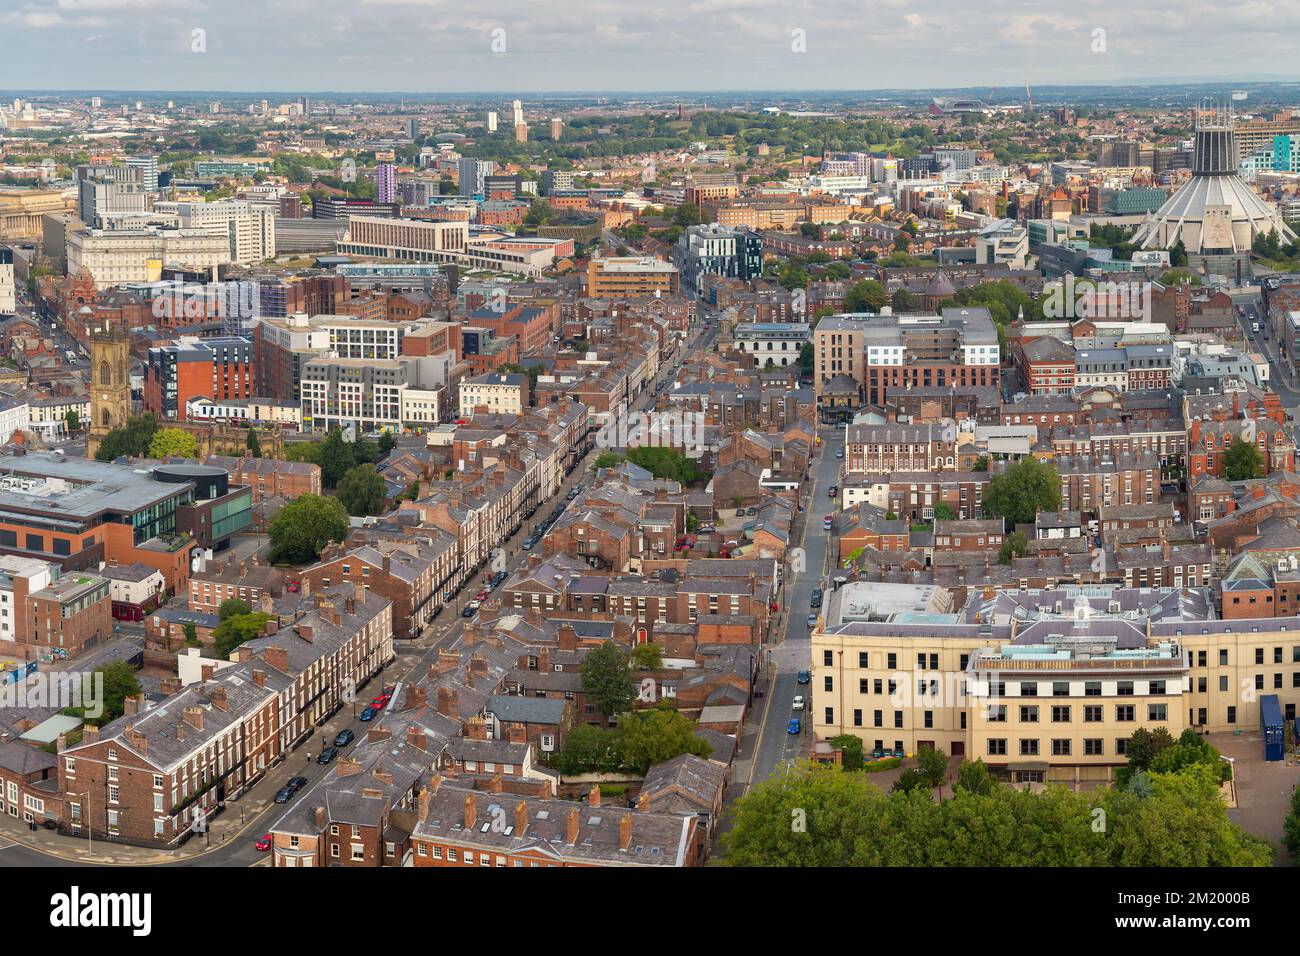 Liverpool, UK: Georgian Quarter of the city, looking up Pilgrim Street; Institute for Performing Arts on the lower right. Stock Photo